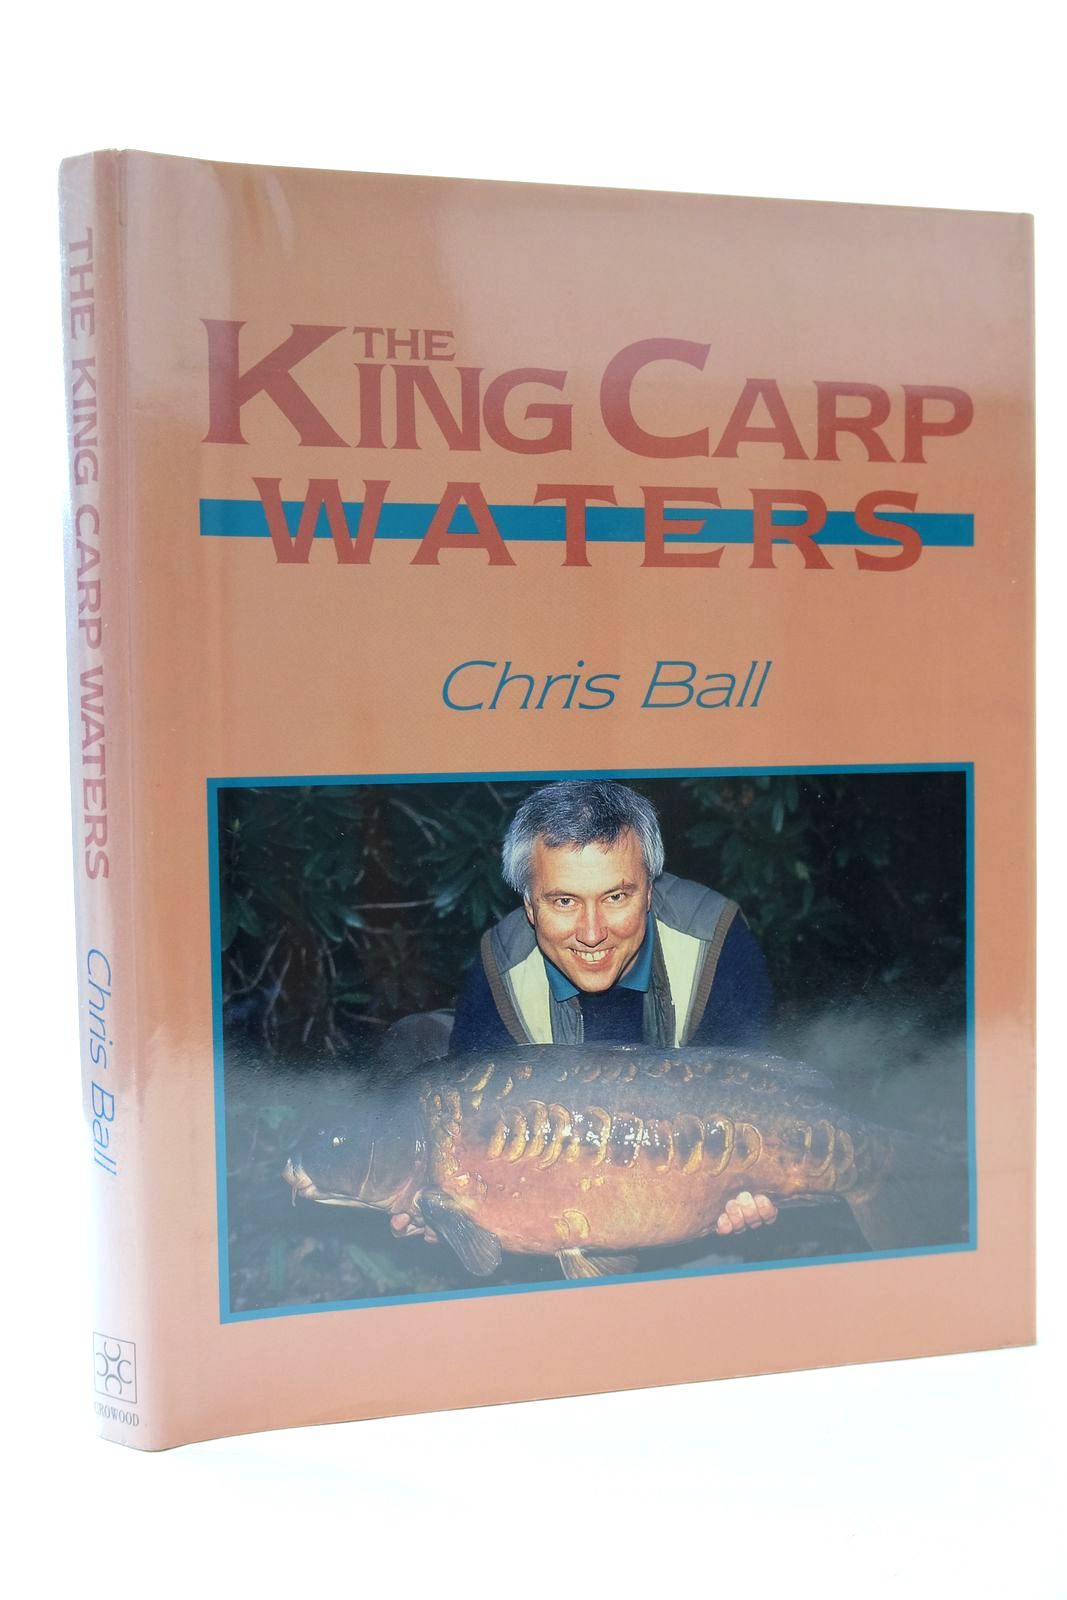 Photo of THE KING CARP WATERS written by Ball, Chris published by The Crowood Press (STOCK CODE: 2131849)  for sale by Stella & Rose's Books